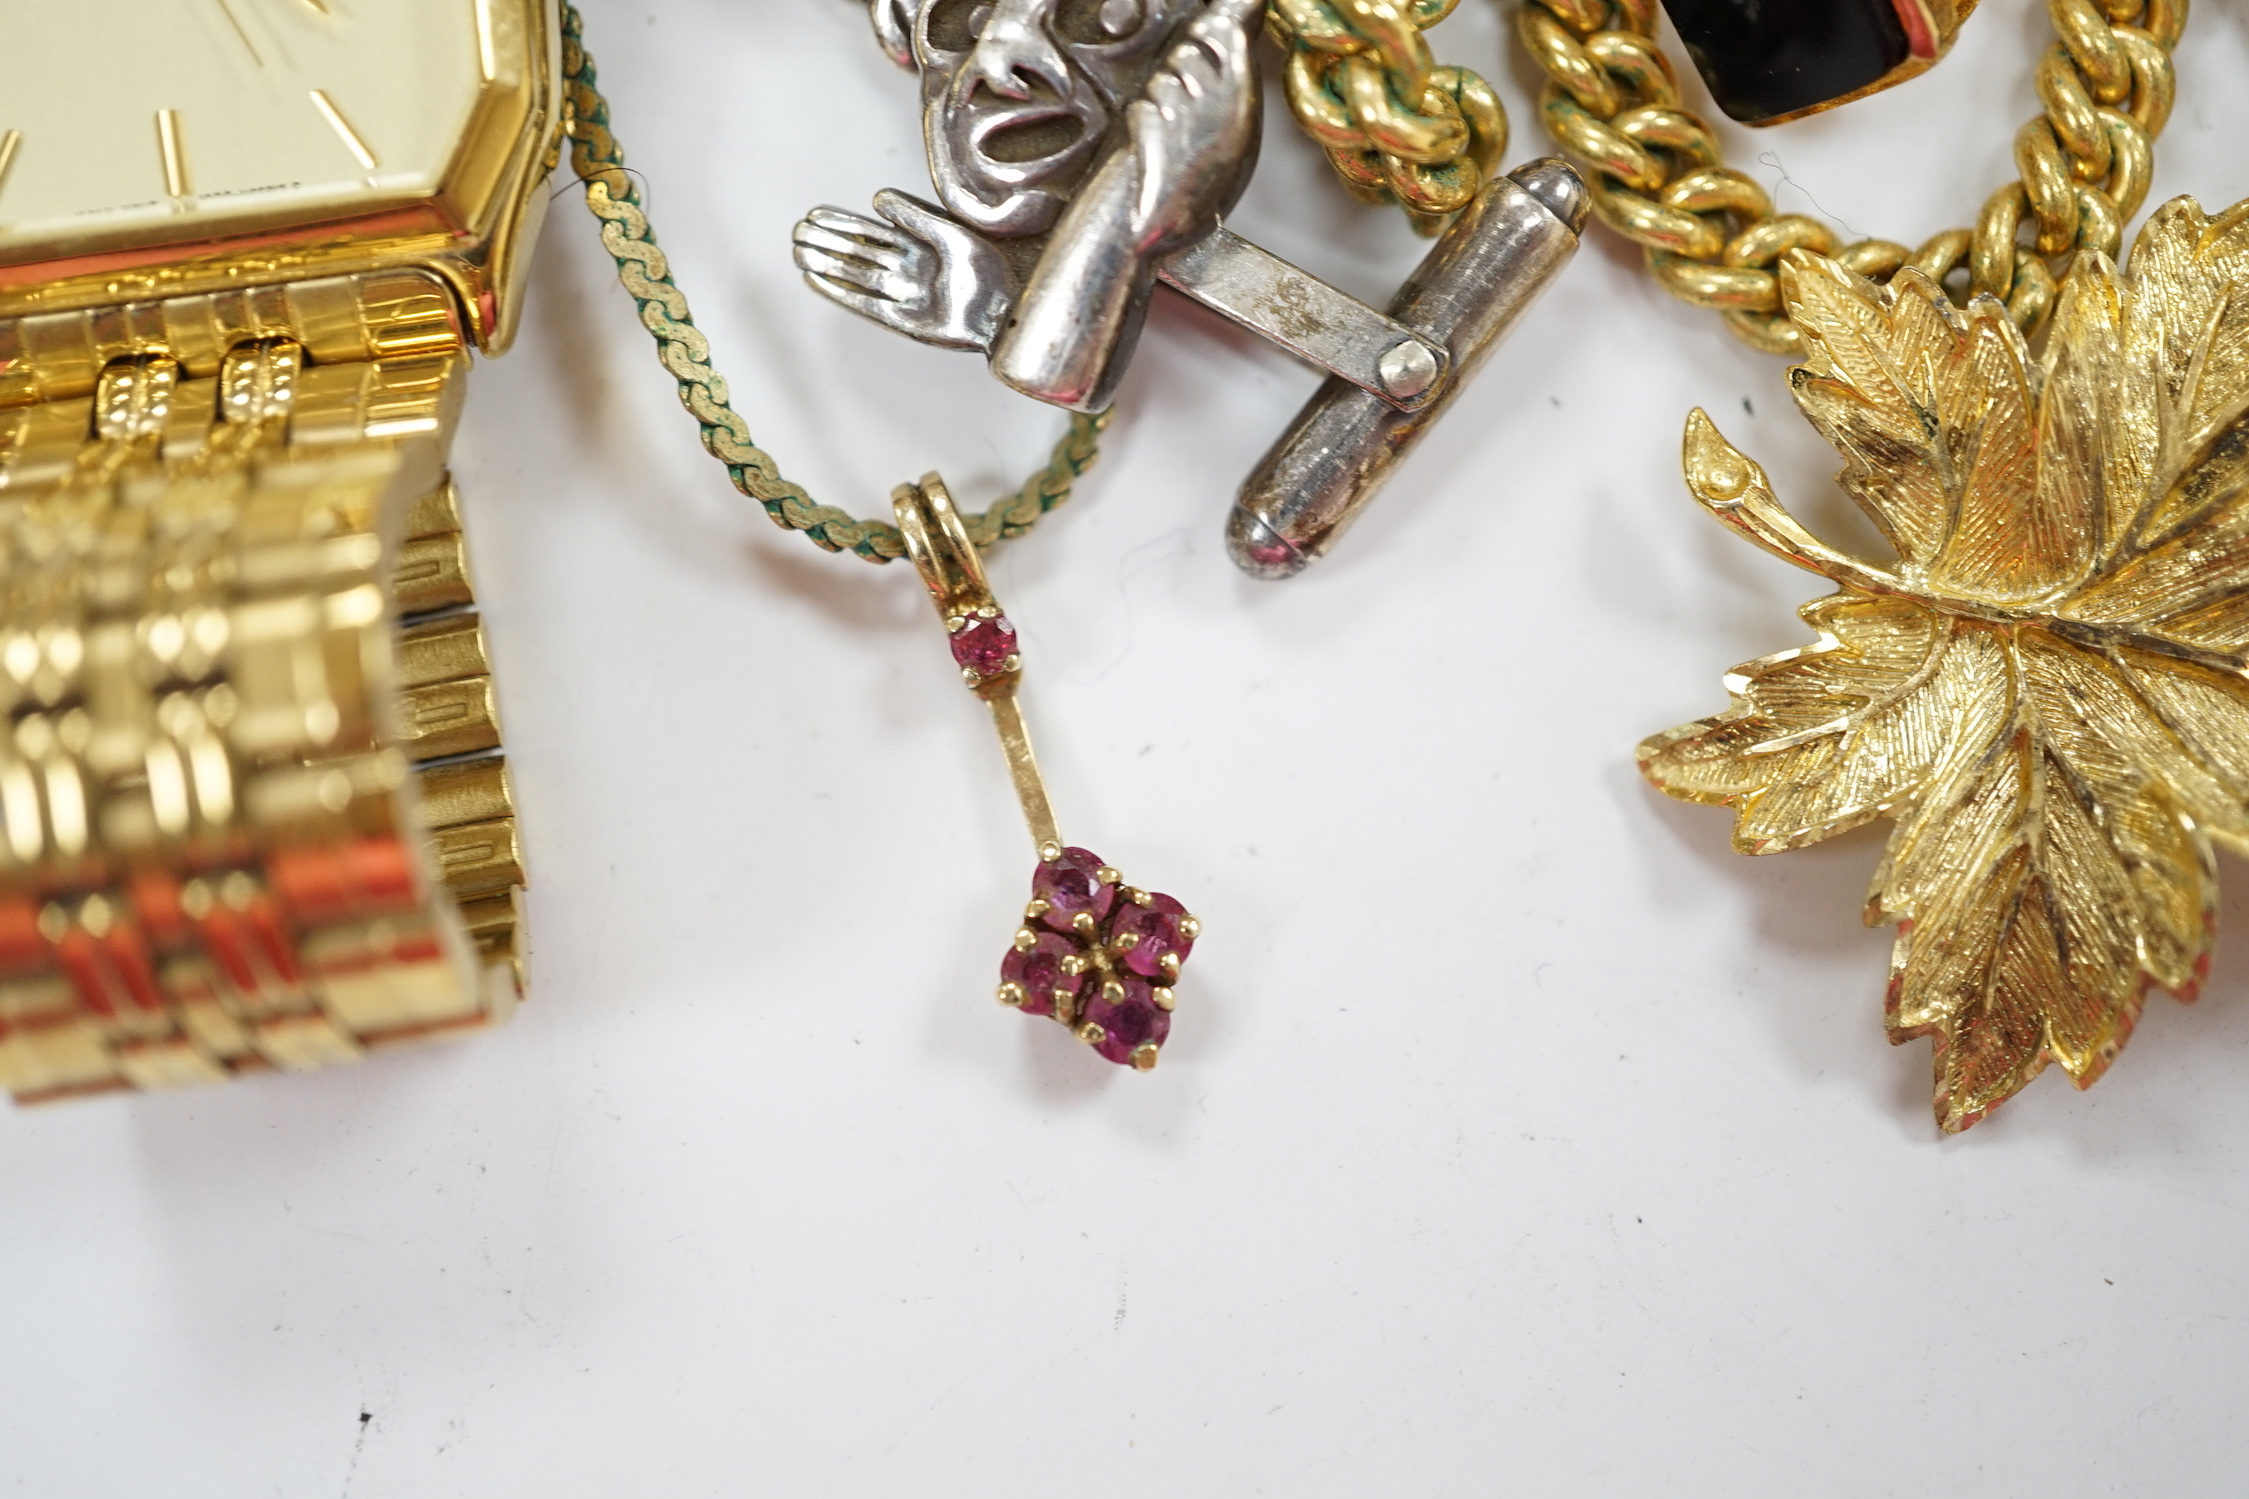 A small 9ct gold and gem set pendant, 22mm, three gilt metal chains, two white metal cufflinks, a - Image 7 of 10